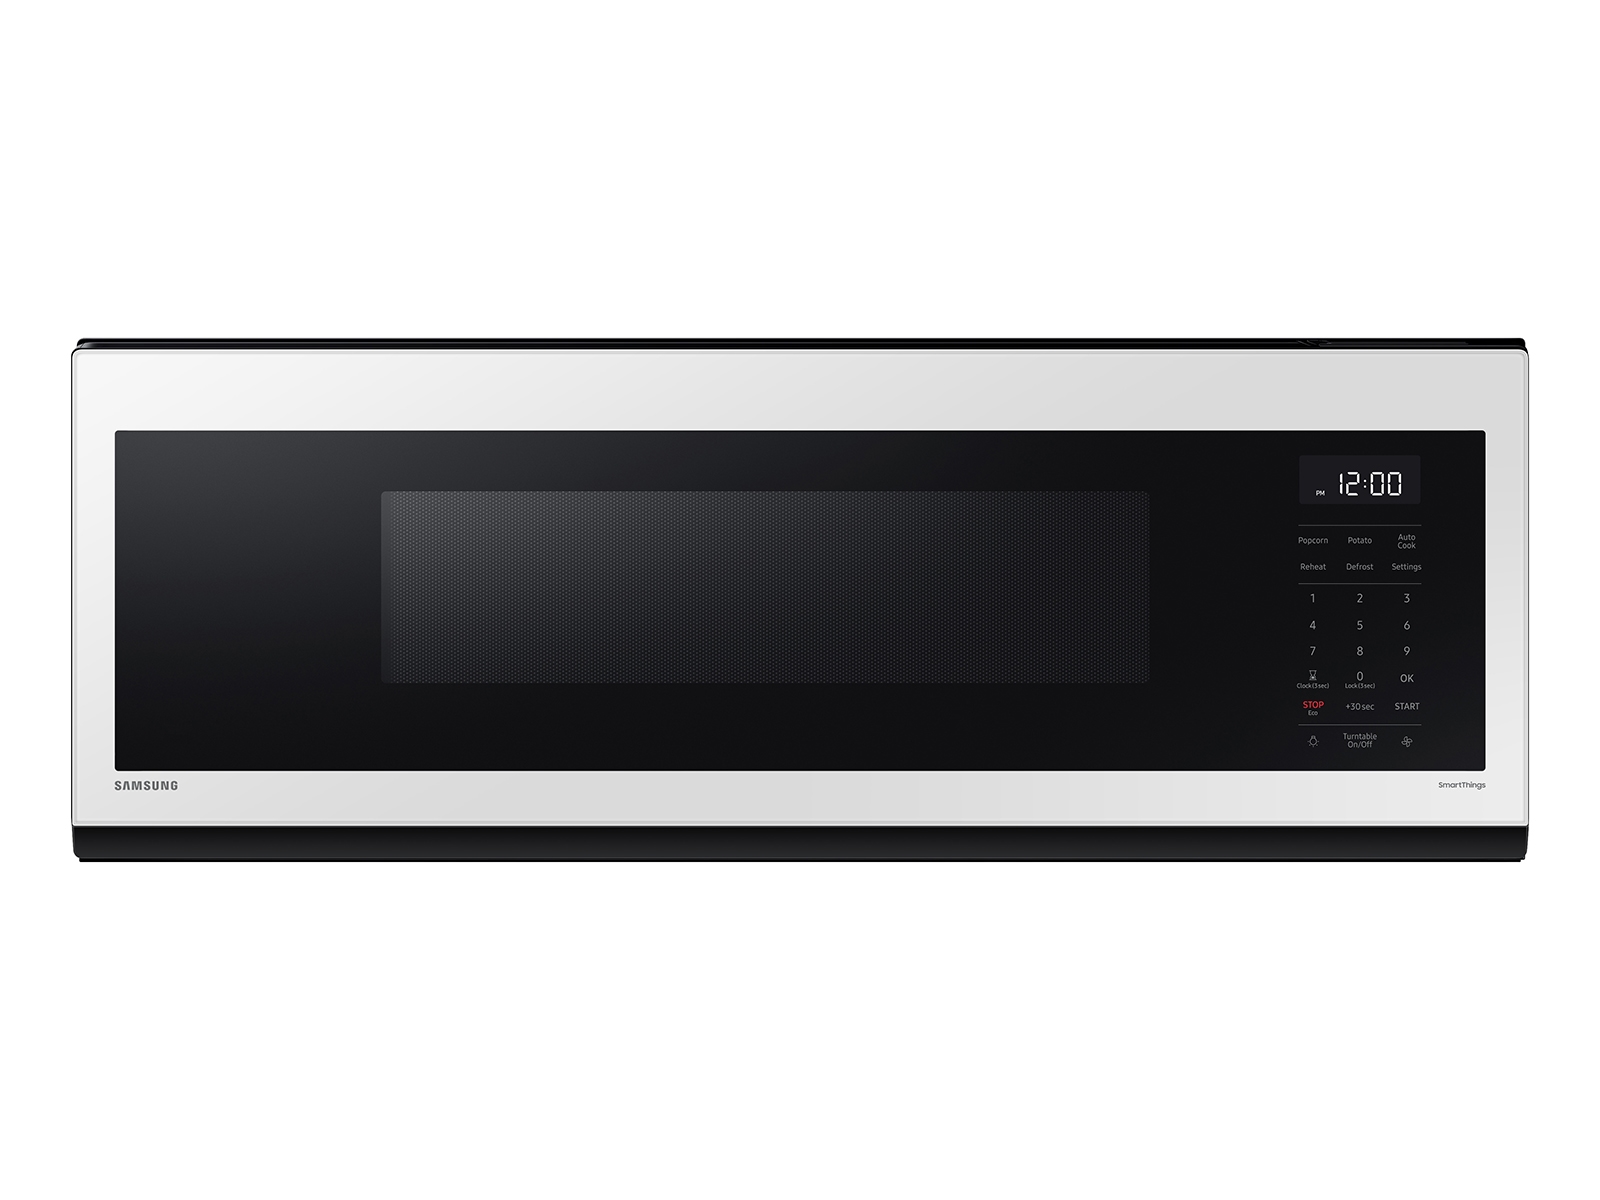 1.4 cu. ft. Countertop Microwave with PowerGrill in Stainless Steel  Microwave - MG14H3020CM/AA